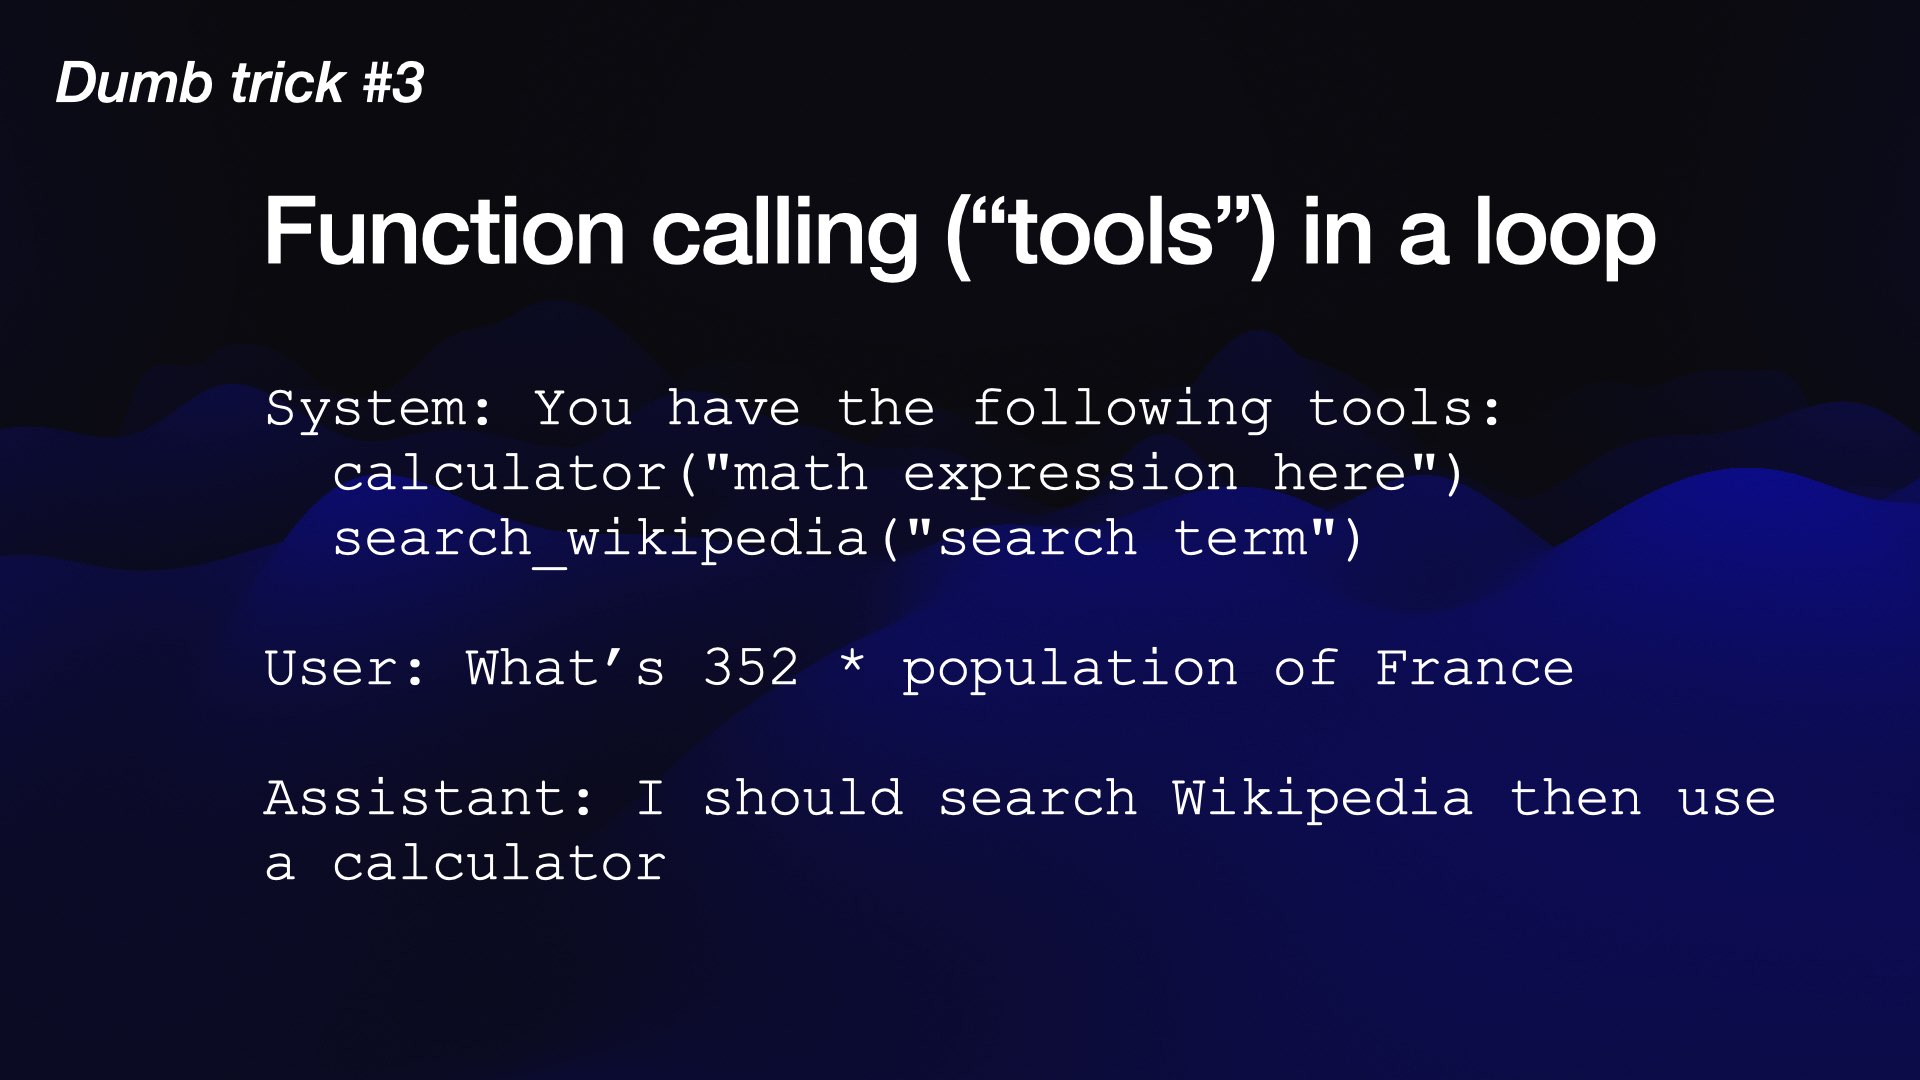 Dumb trick #3  Function calling (“tools”) in a loop  System: You have the following tools:   calculator("math expression here")   search_wikipedia("search term")  User: What’s 352 * population of France  Assistant: I should search Wikipedia then use a calculator